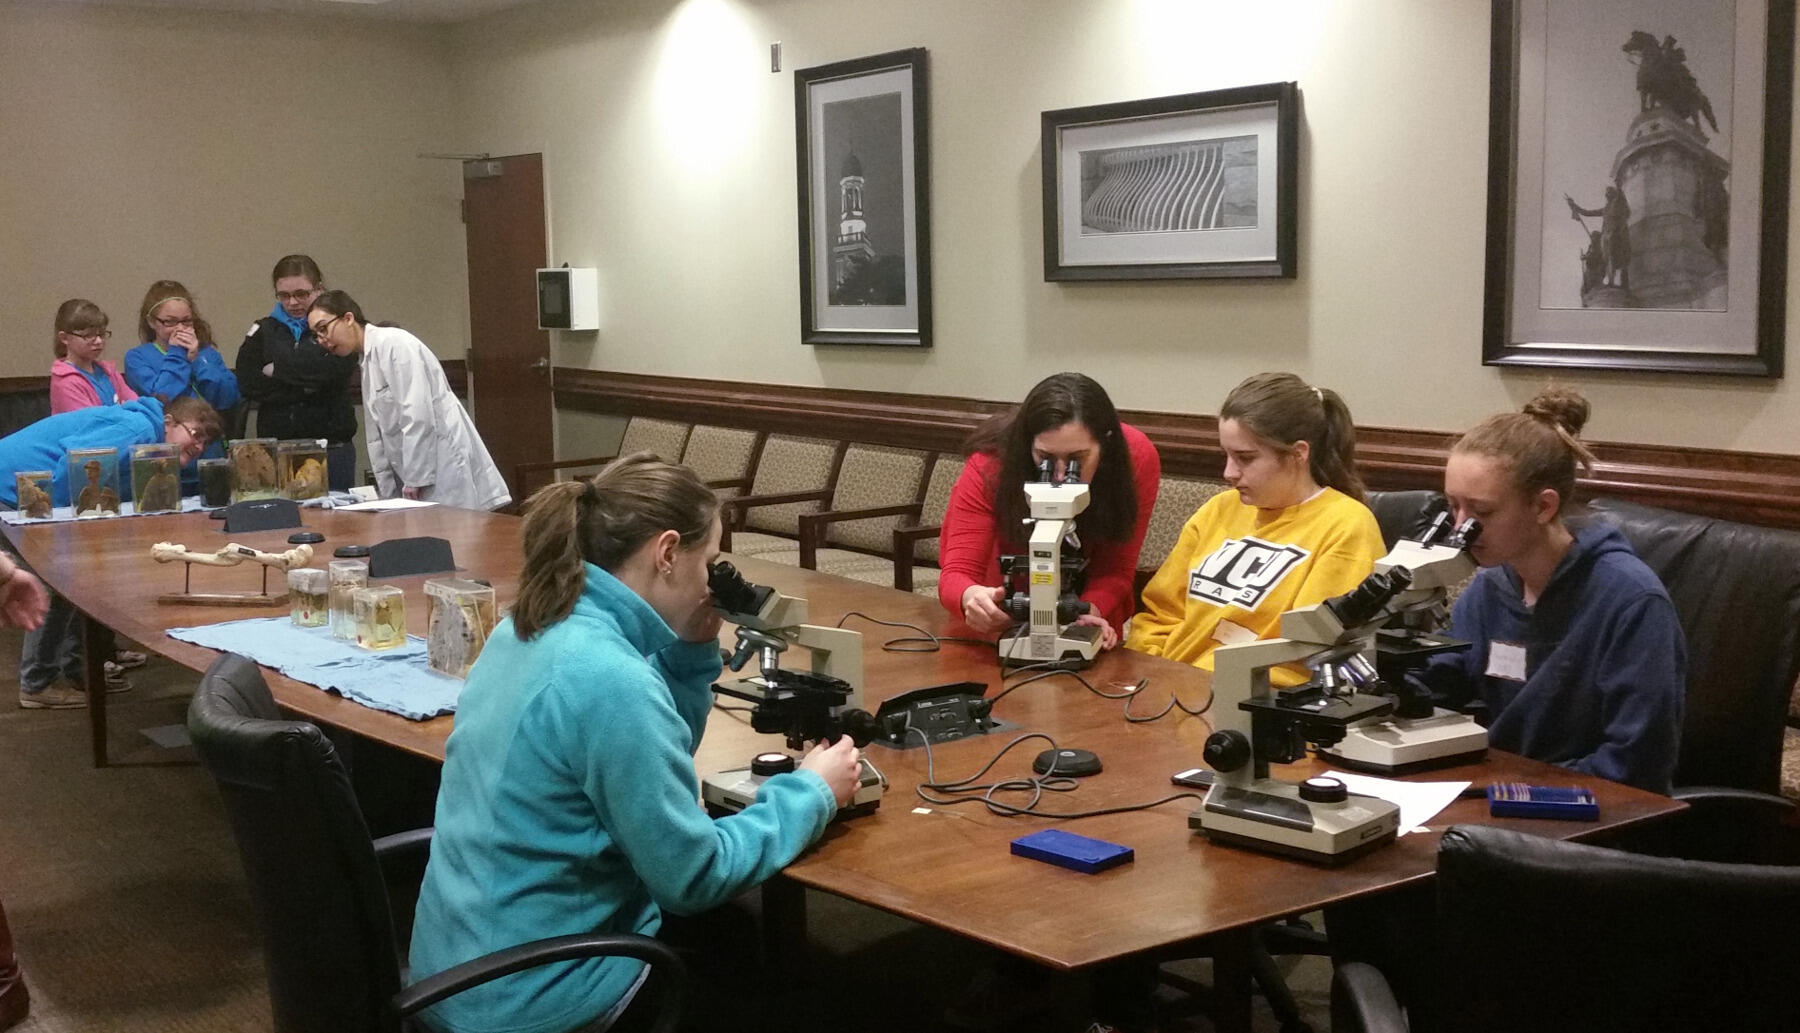 During a pathology rotation, Girl Scouts (at right) learned to use a microscope to visually observe differences between healthy and unhealthy human cells while others (at left) looked at organs from patients with different conditions. Photo by Ayana Scott-Elliston.